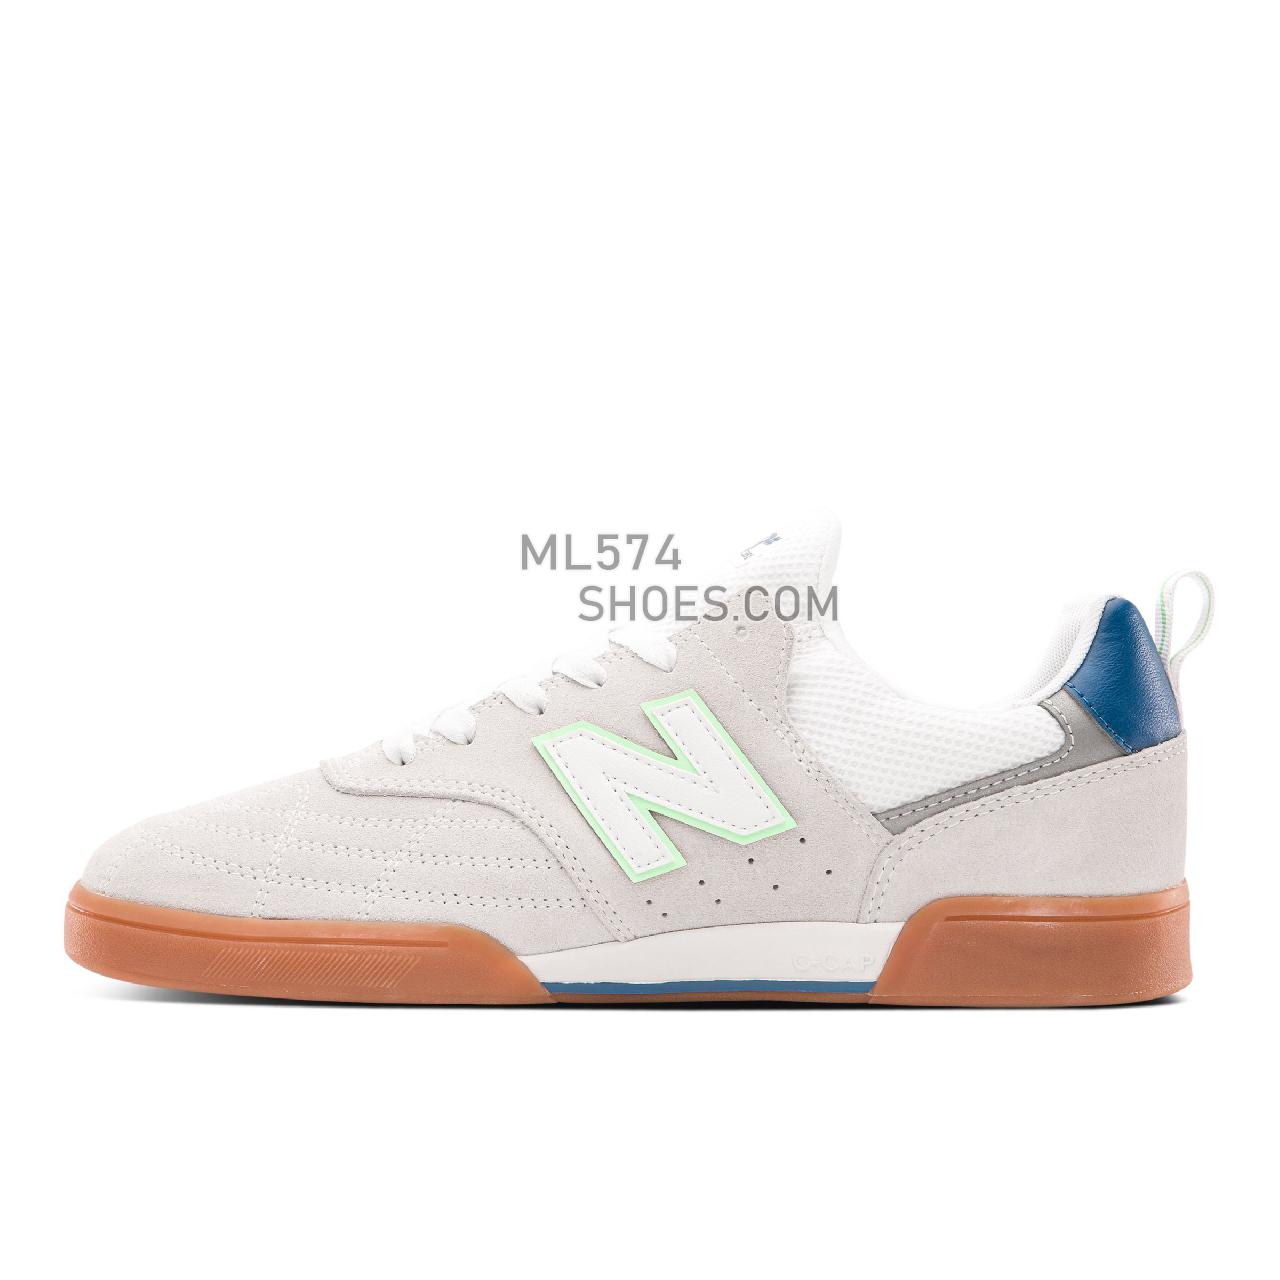 New Balance NB NUMERIC 288 SPORT - Men's NB Numeric Skate - White with Powder Green - NM288SSE